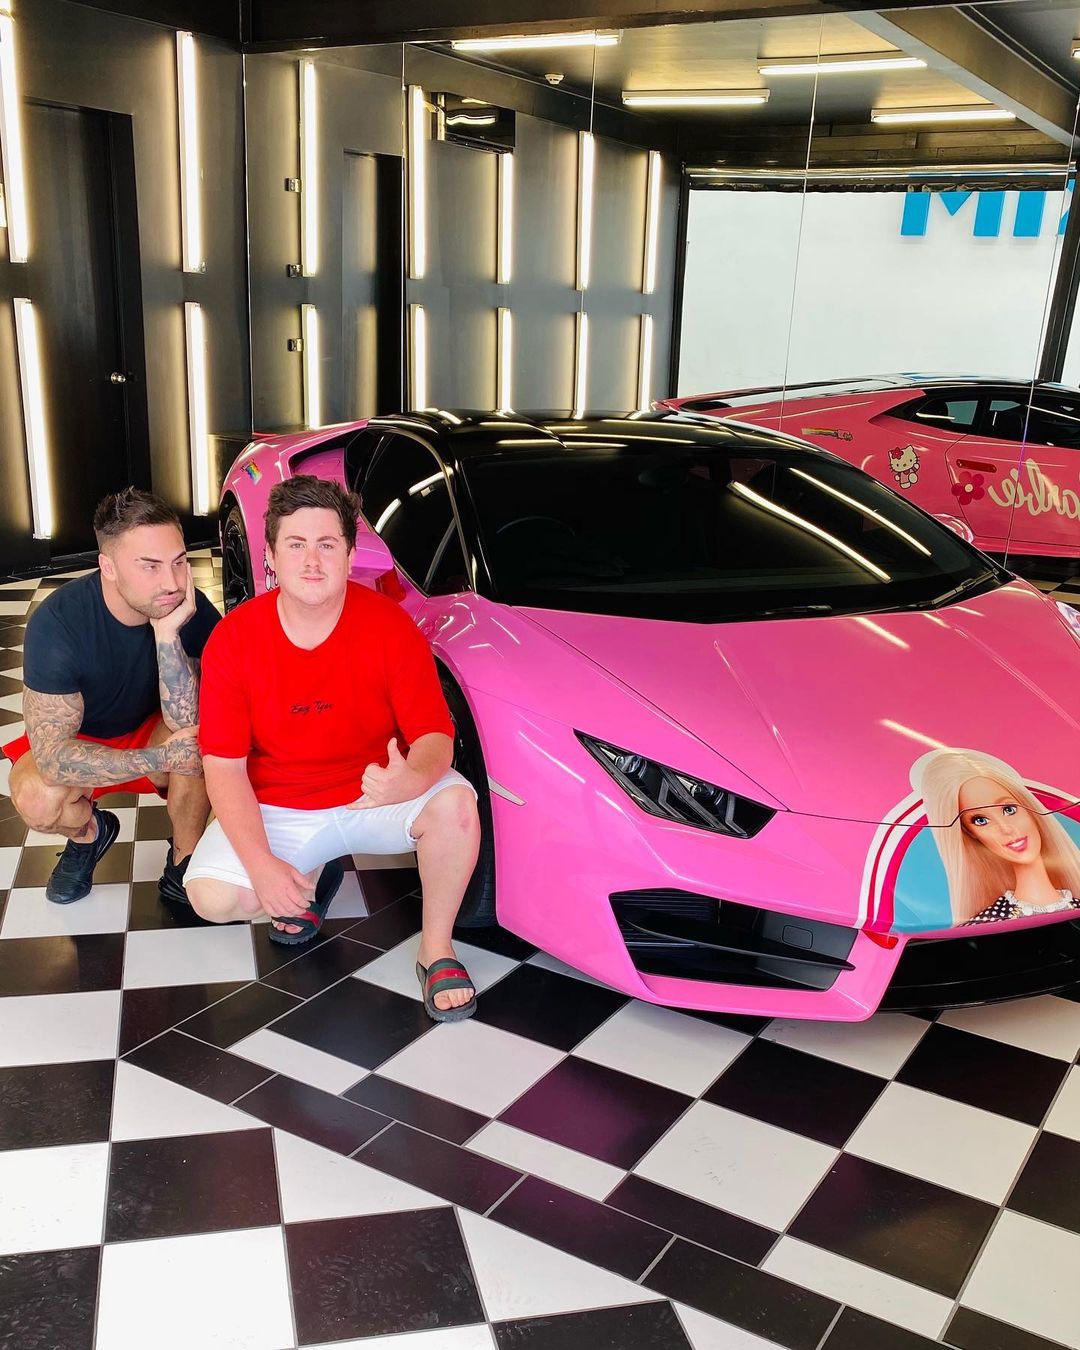 Lacclan Gottfried Took Revenge on Jackson O'Doherty -- Painted his Entire car Pink